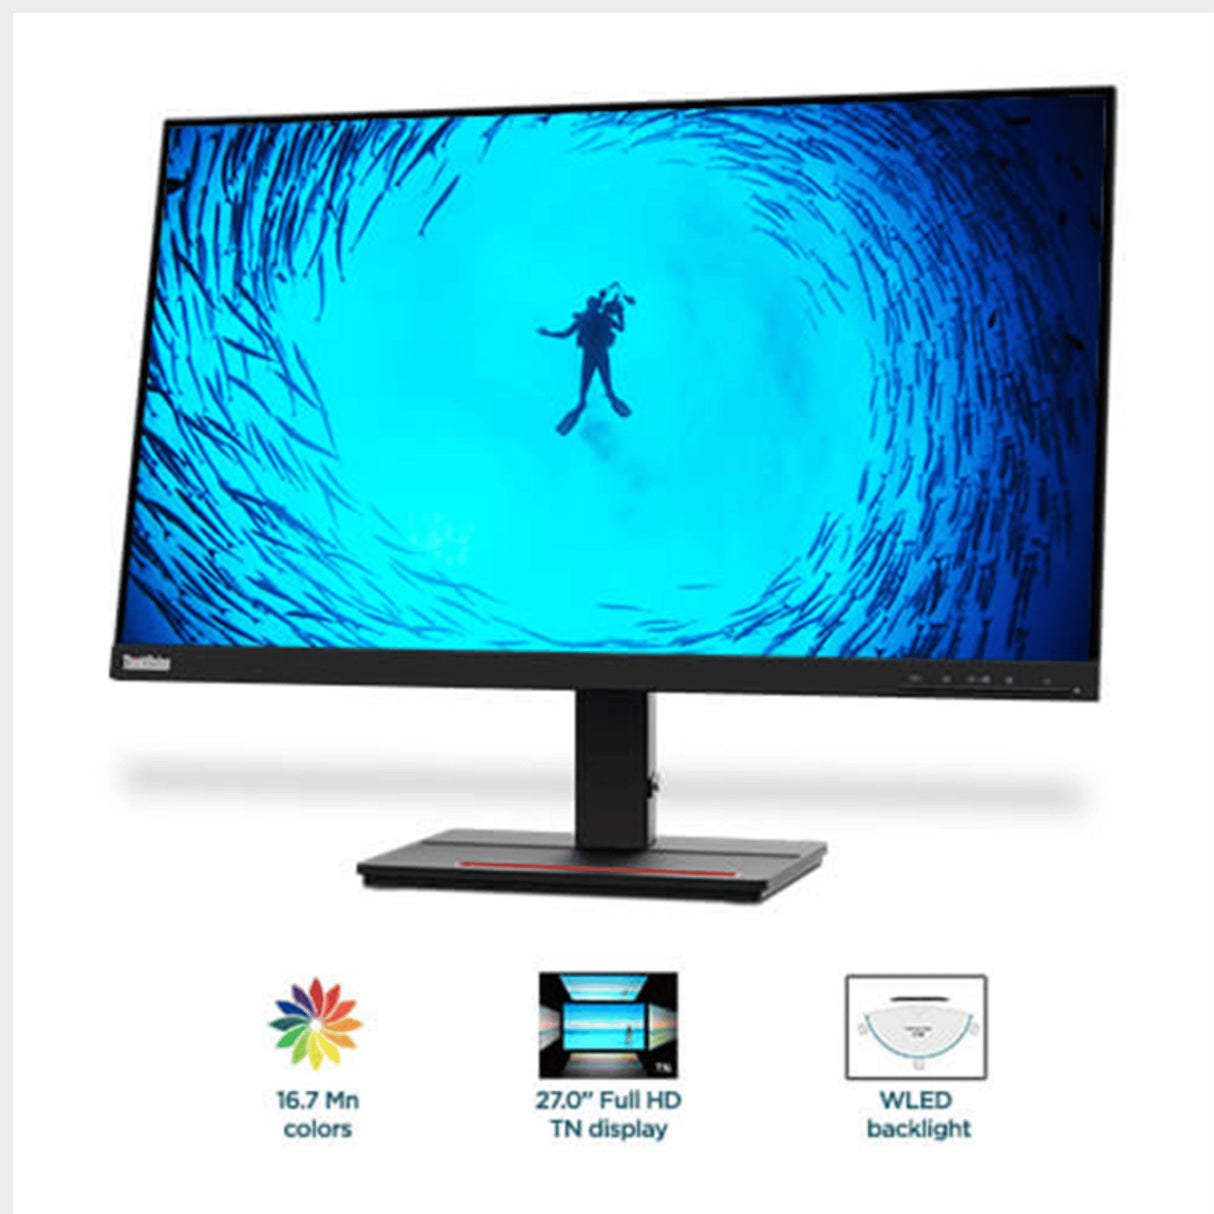 Shop now for the Lenovo ThinkVision S27e-20 27" FHD Monitor at KWT Tech Mart! Unbeatable price of UGX 1,620,000 – Crystal-clear display meets value!